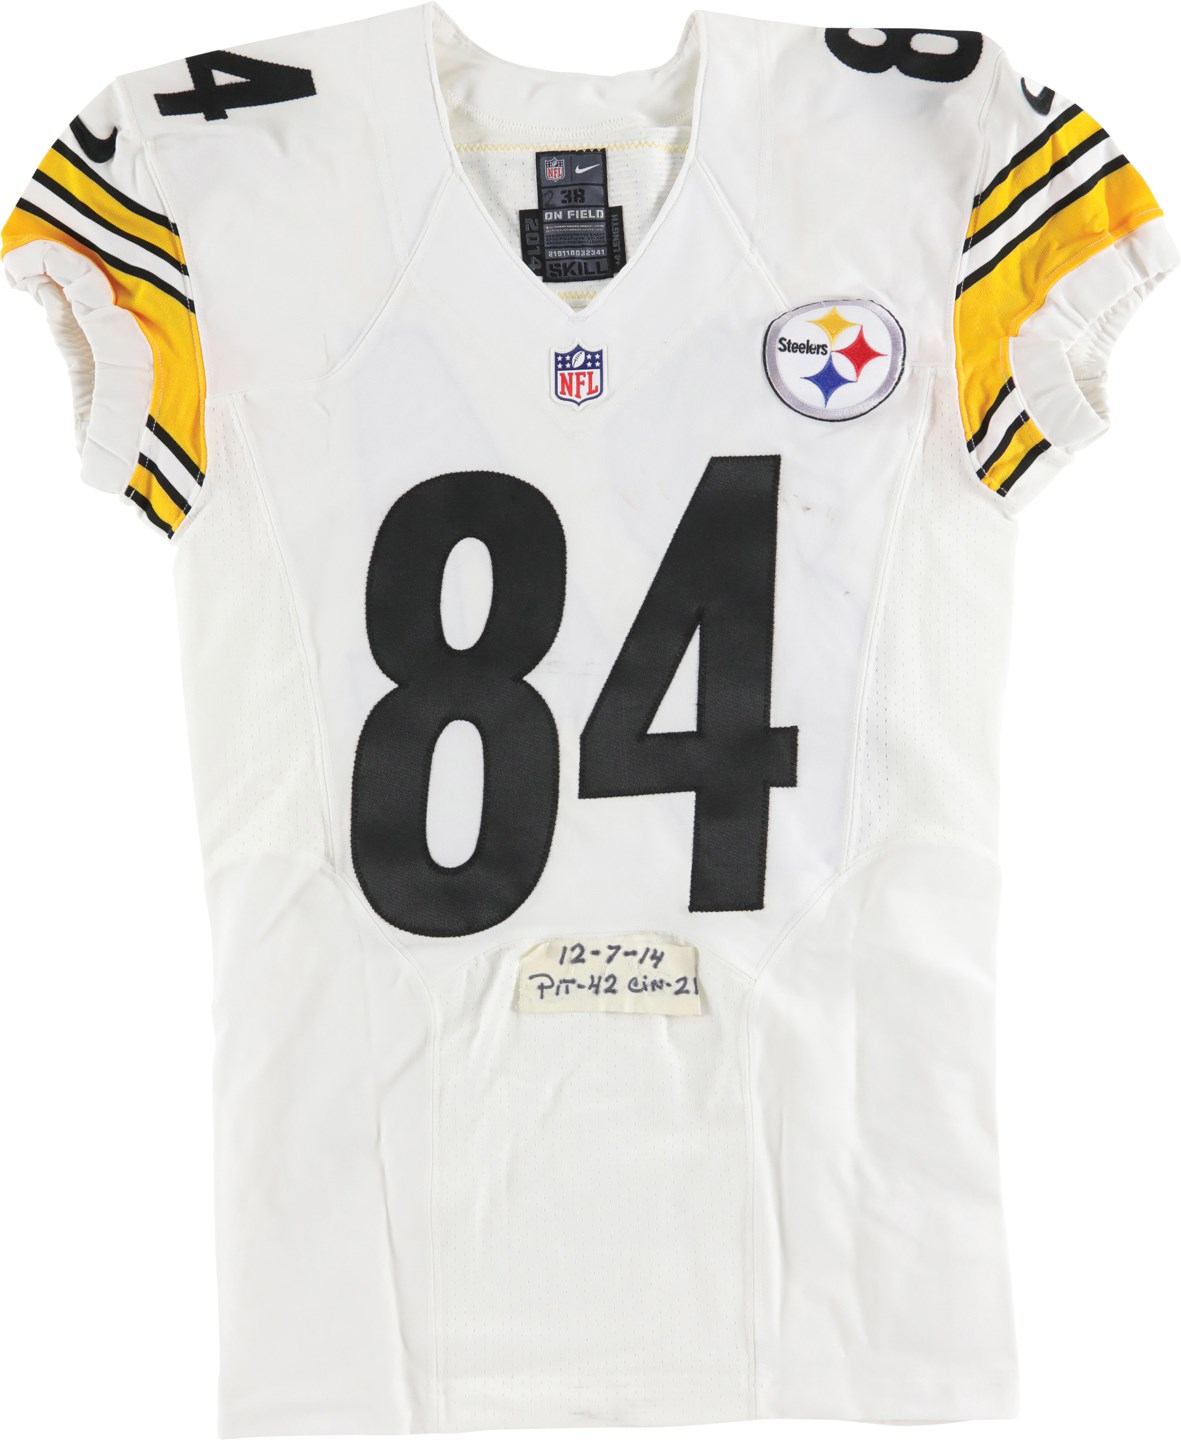 Football - 12/7/14 Antonio Brown Pittsburgh Steelers Signed Inscribed Game Worn Jersey (Photo-Matched)